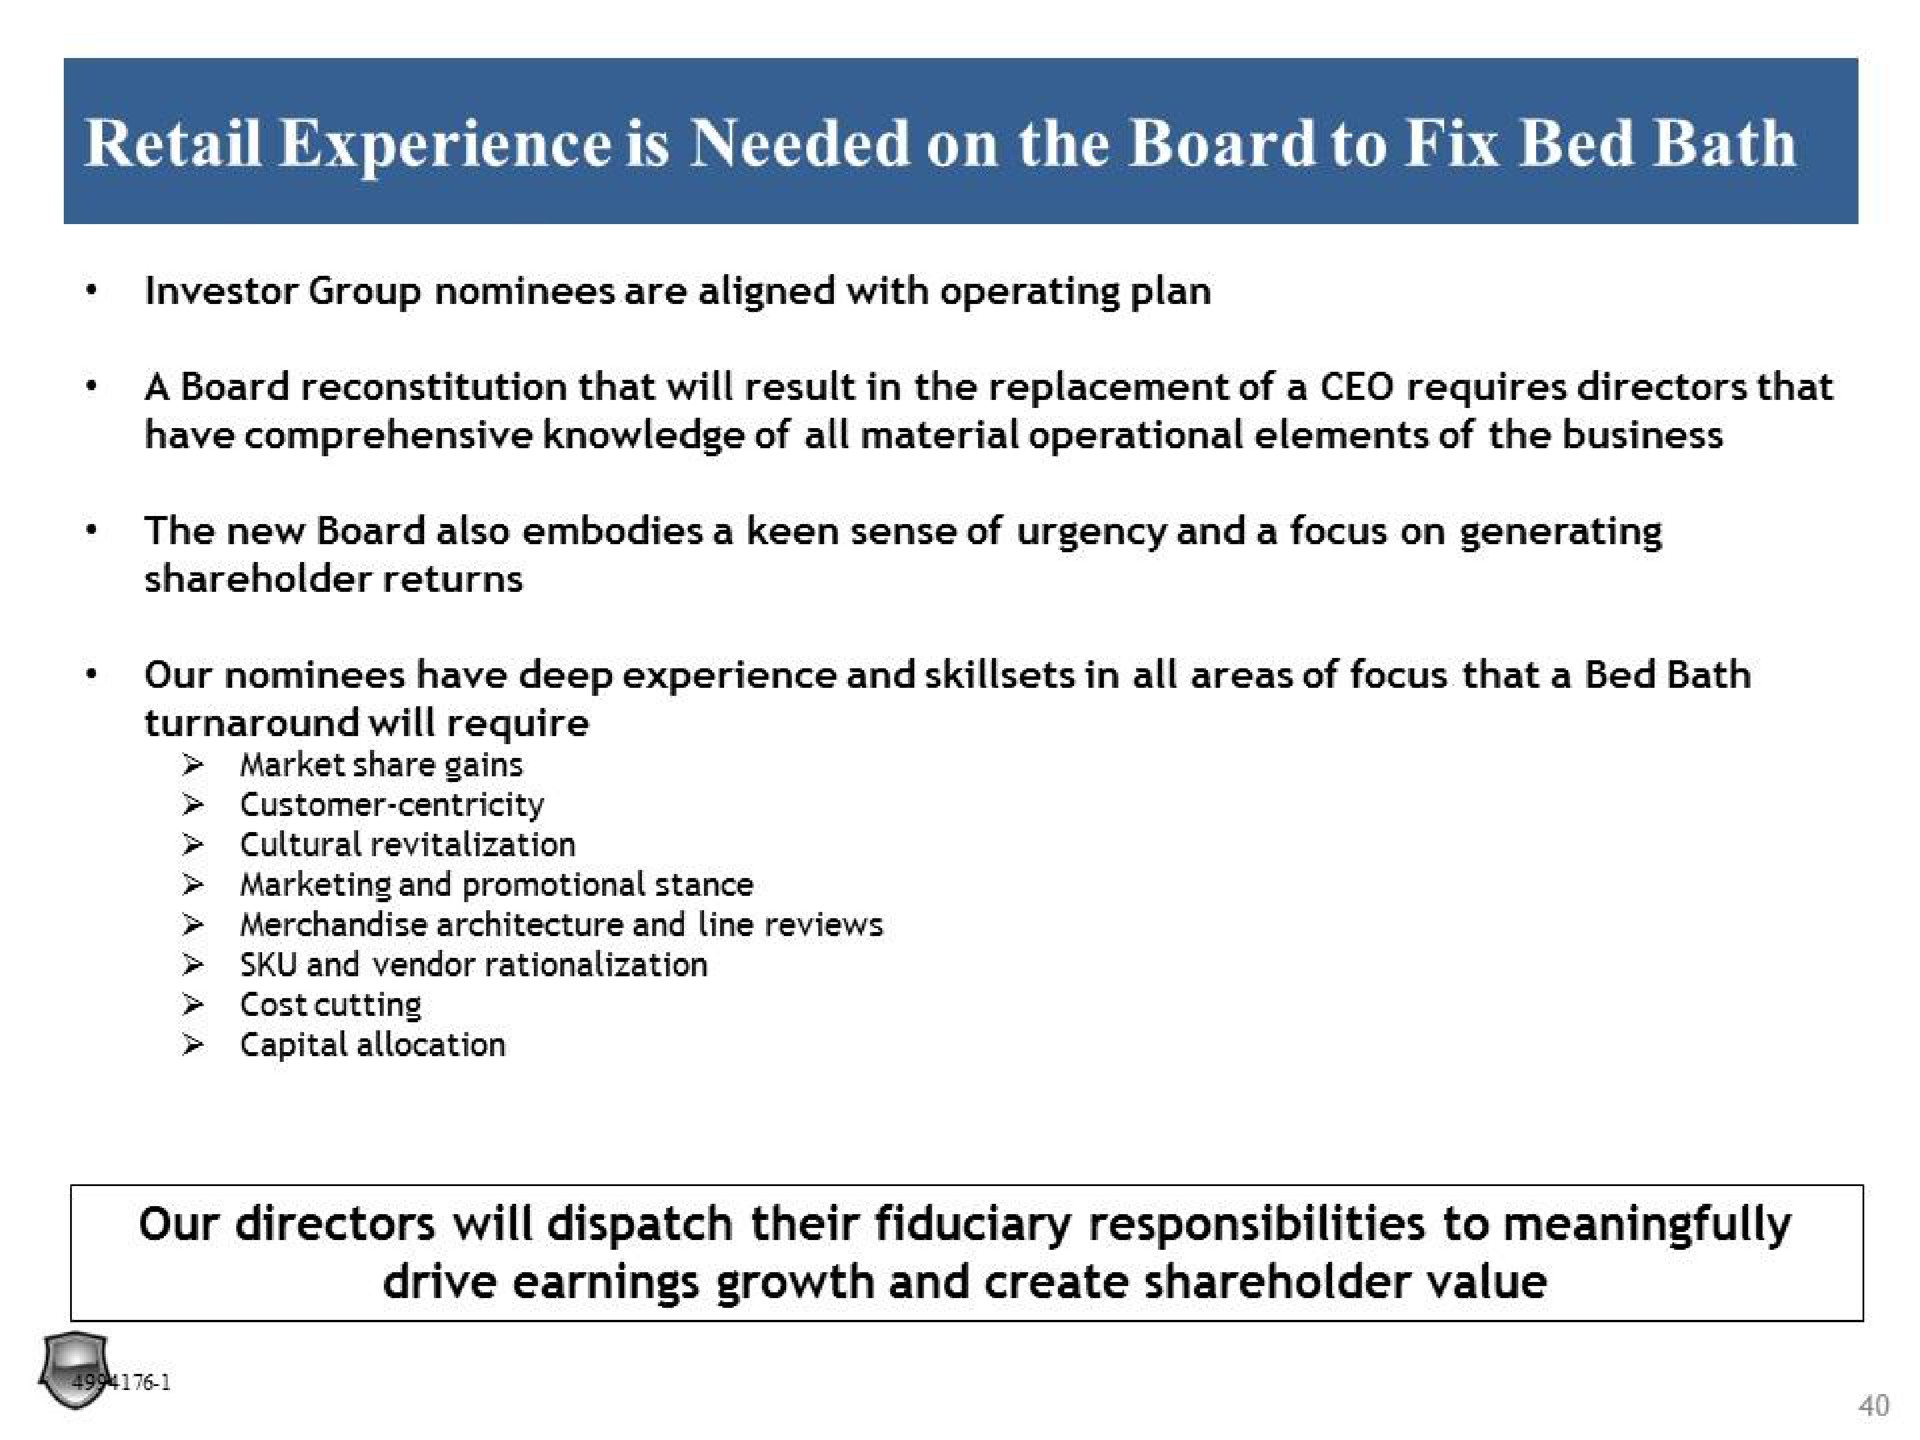 retail experience is needed on the board to fix bed bath our directors will dispatch their fiduciary responsibilities to meaningfully drive earnings growth and create shareholder value | Legion Partners